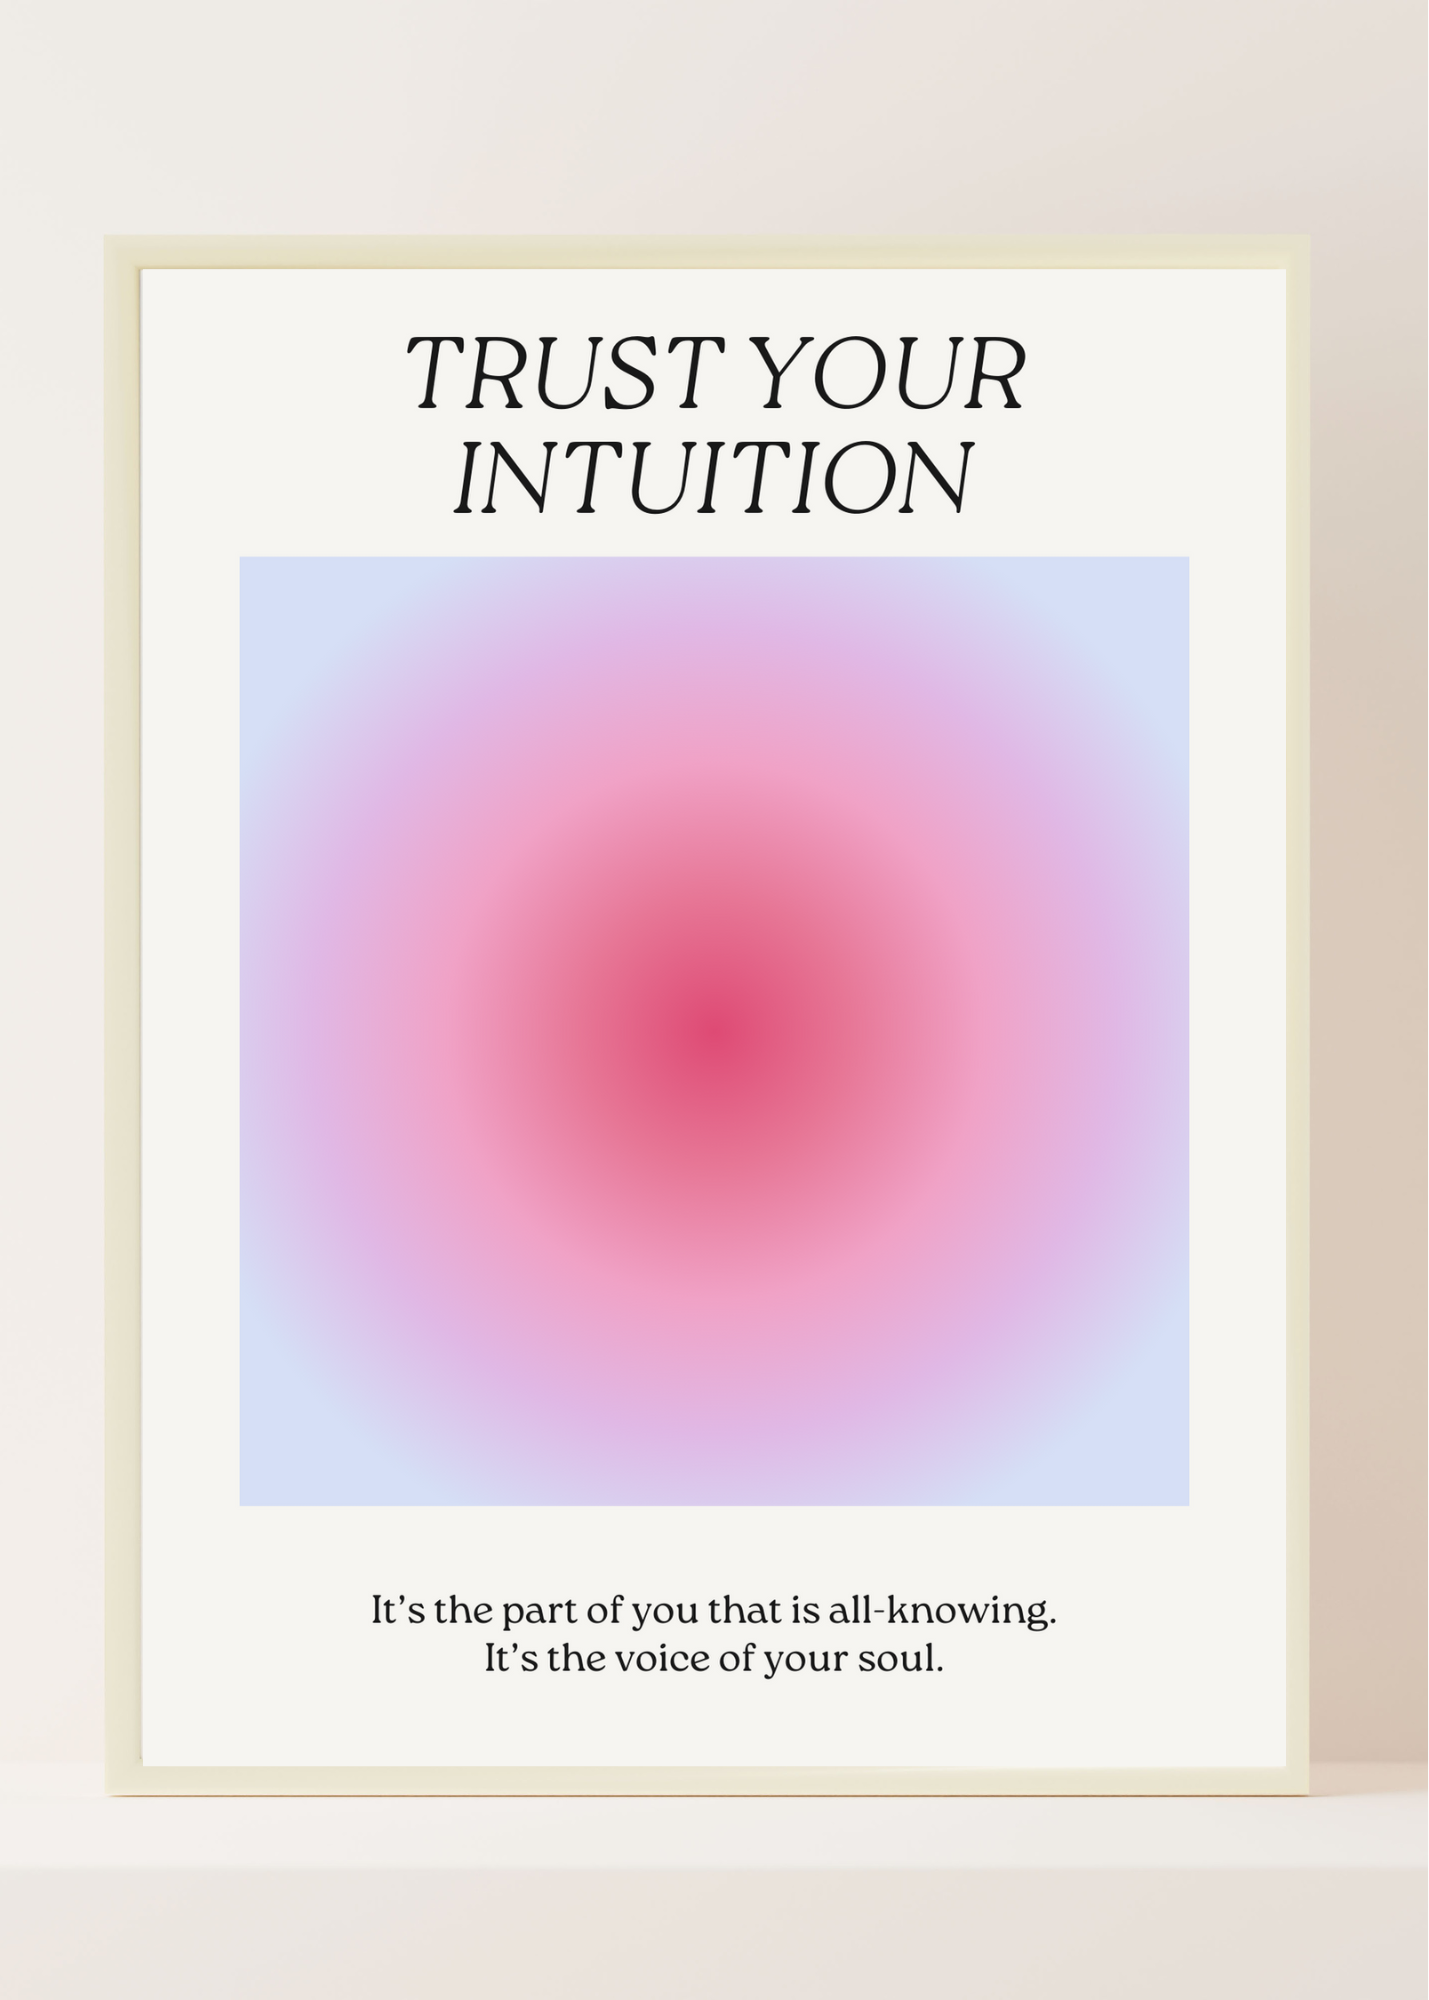 Trendy aesthetic digital wall print that says "trust your intuition". It features a pink, purple and blue gradient circle in the middle and the text is black and minimalistic. chic print